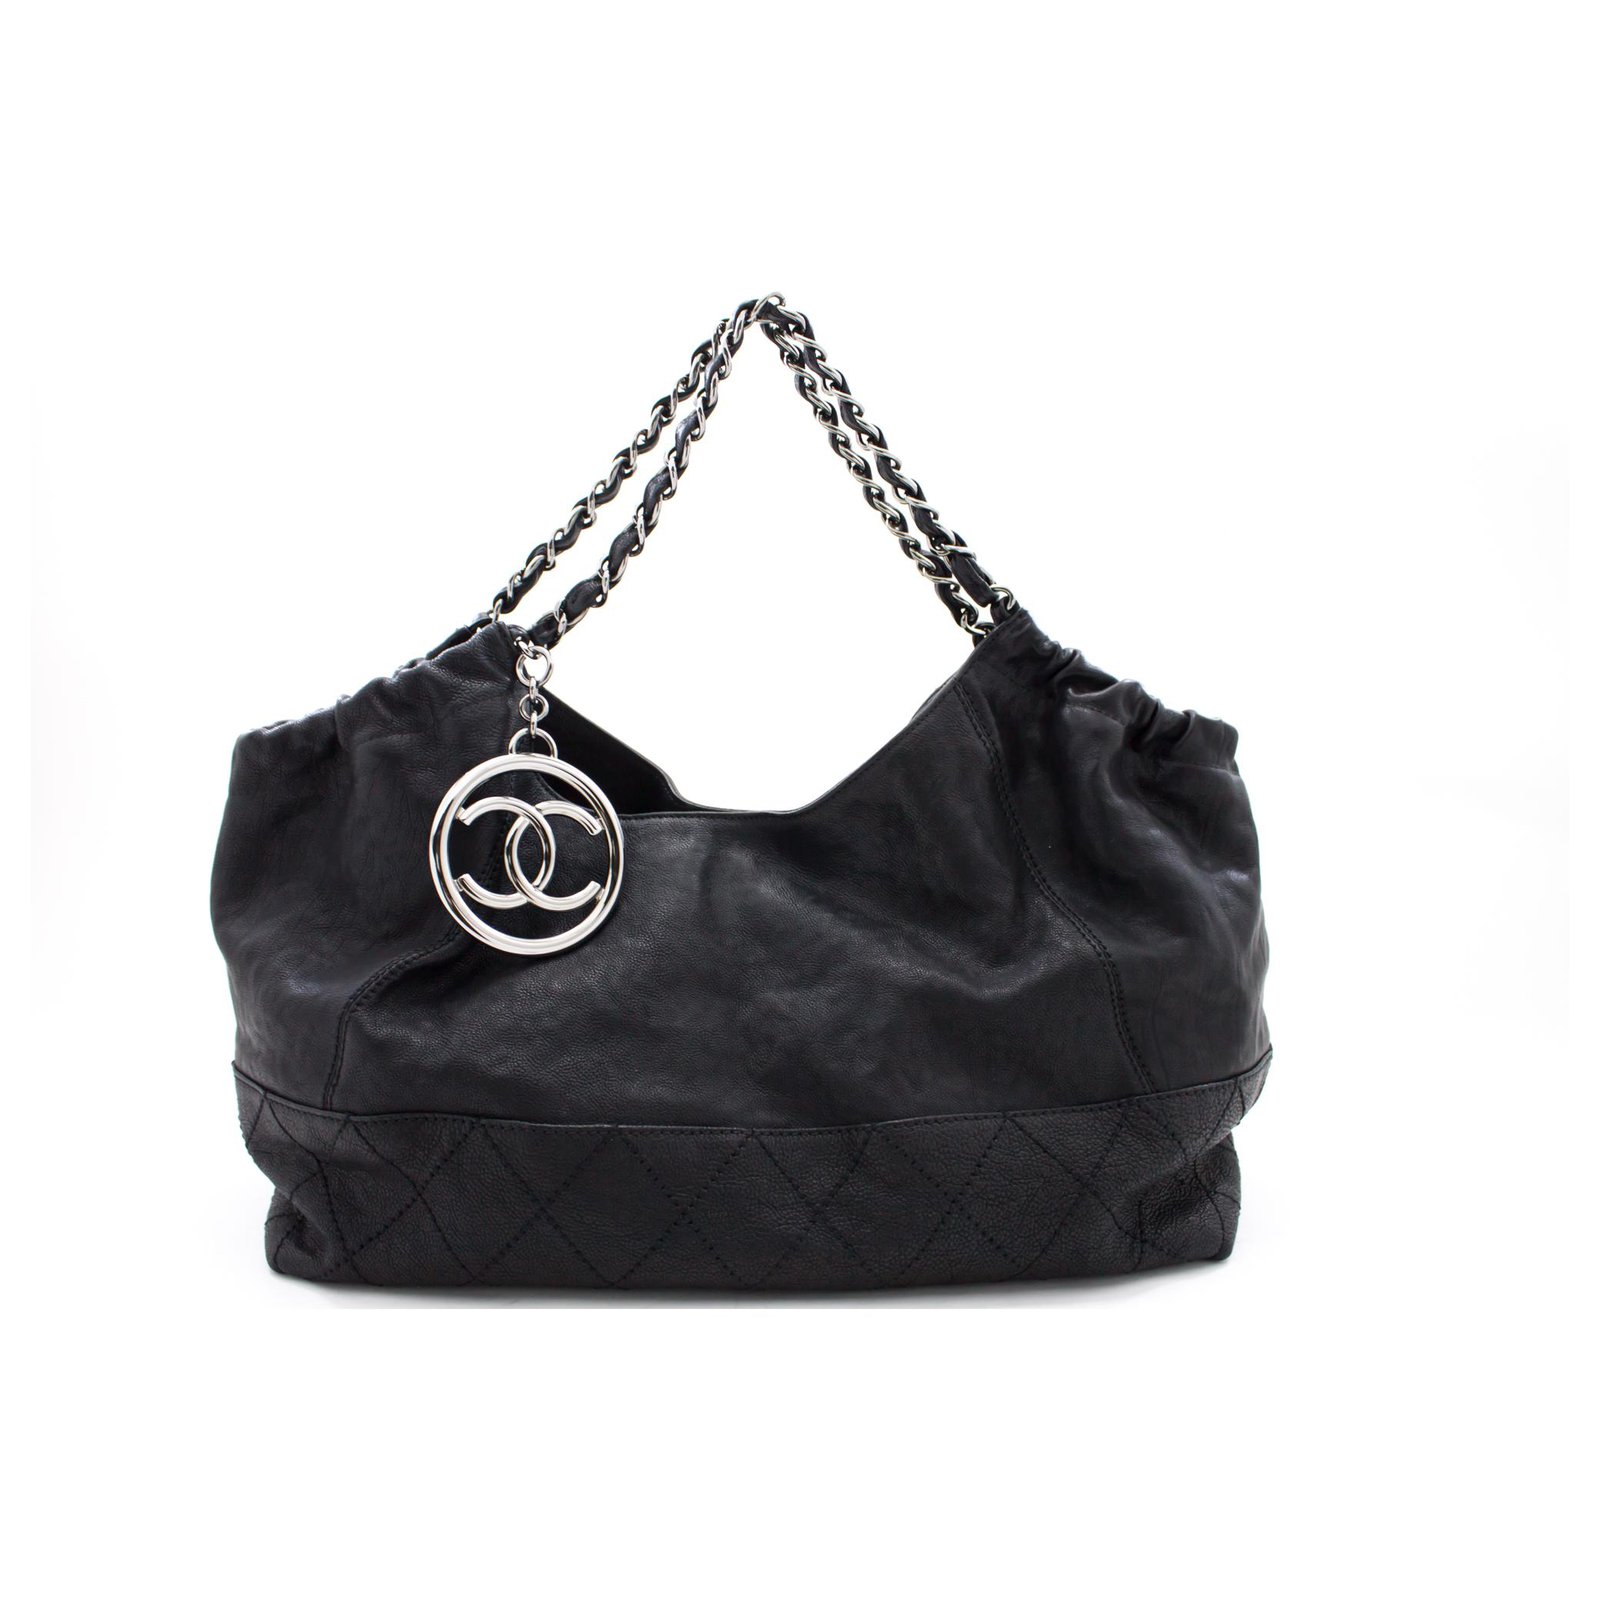 Chanel - Authenticated Coco Cabas Handbag - Leather Black for Women, Good Condition